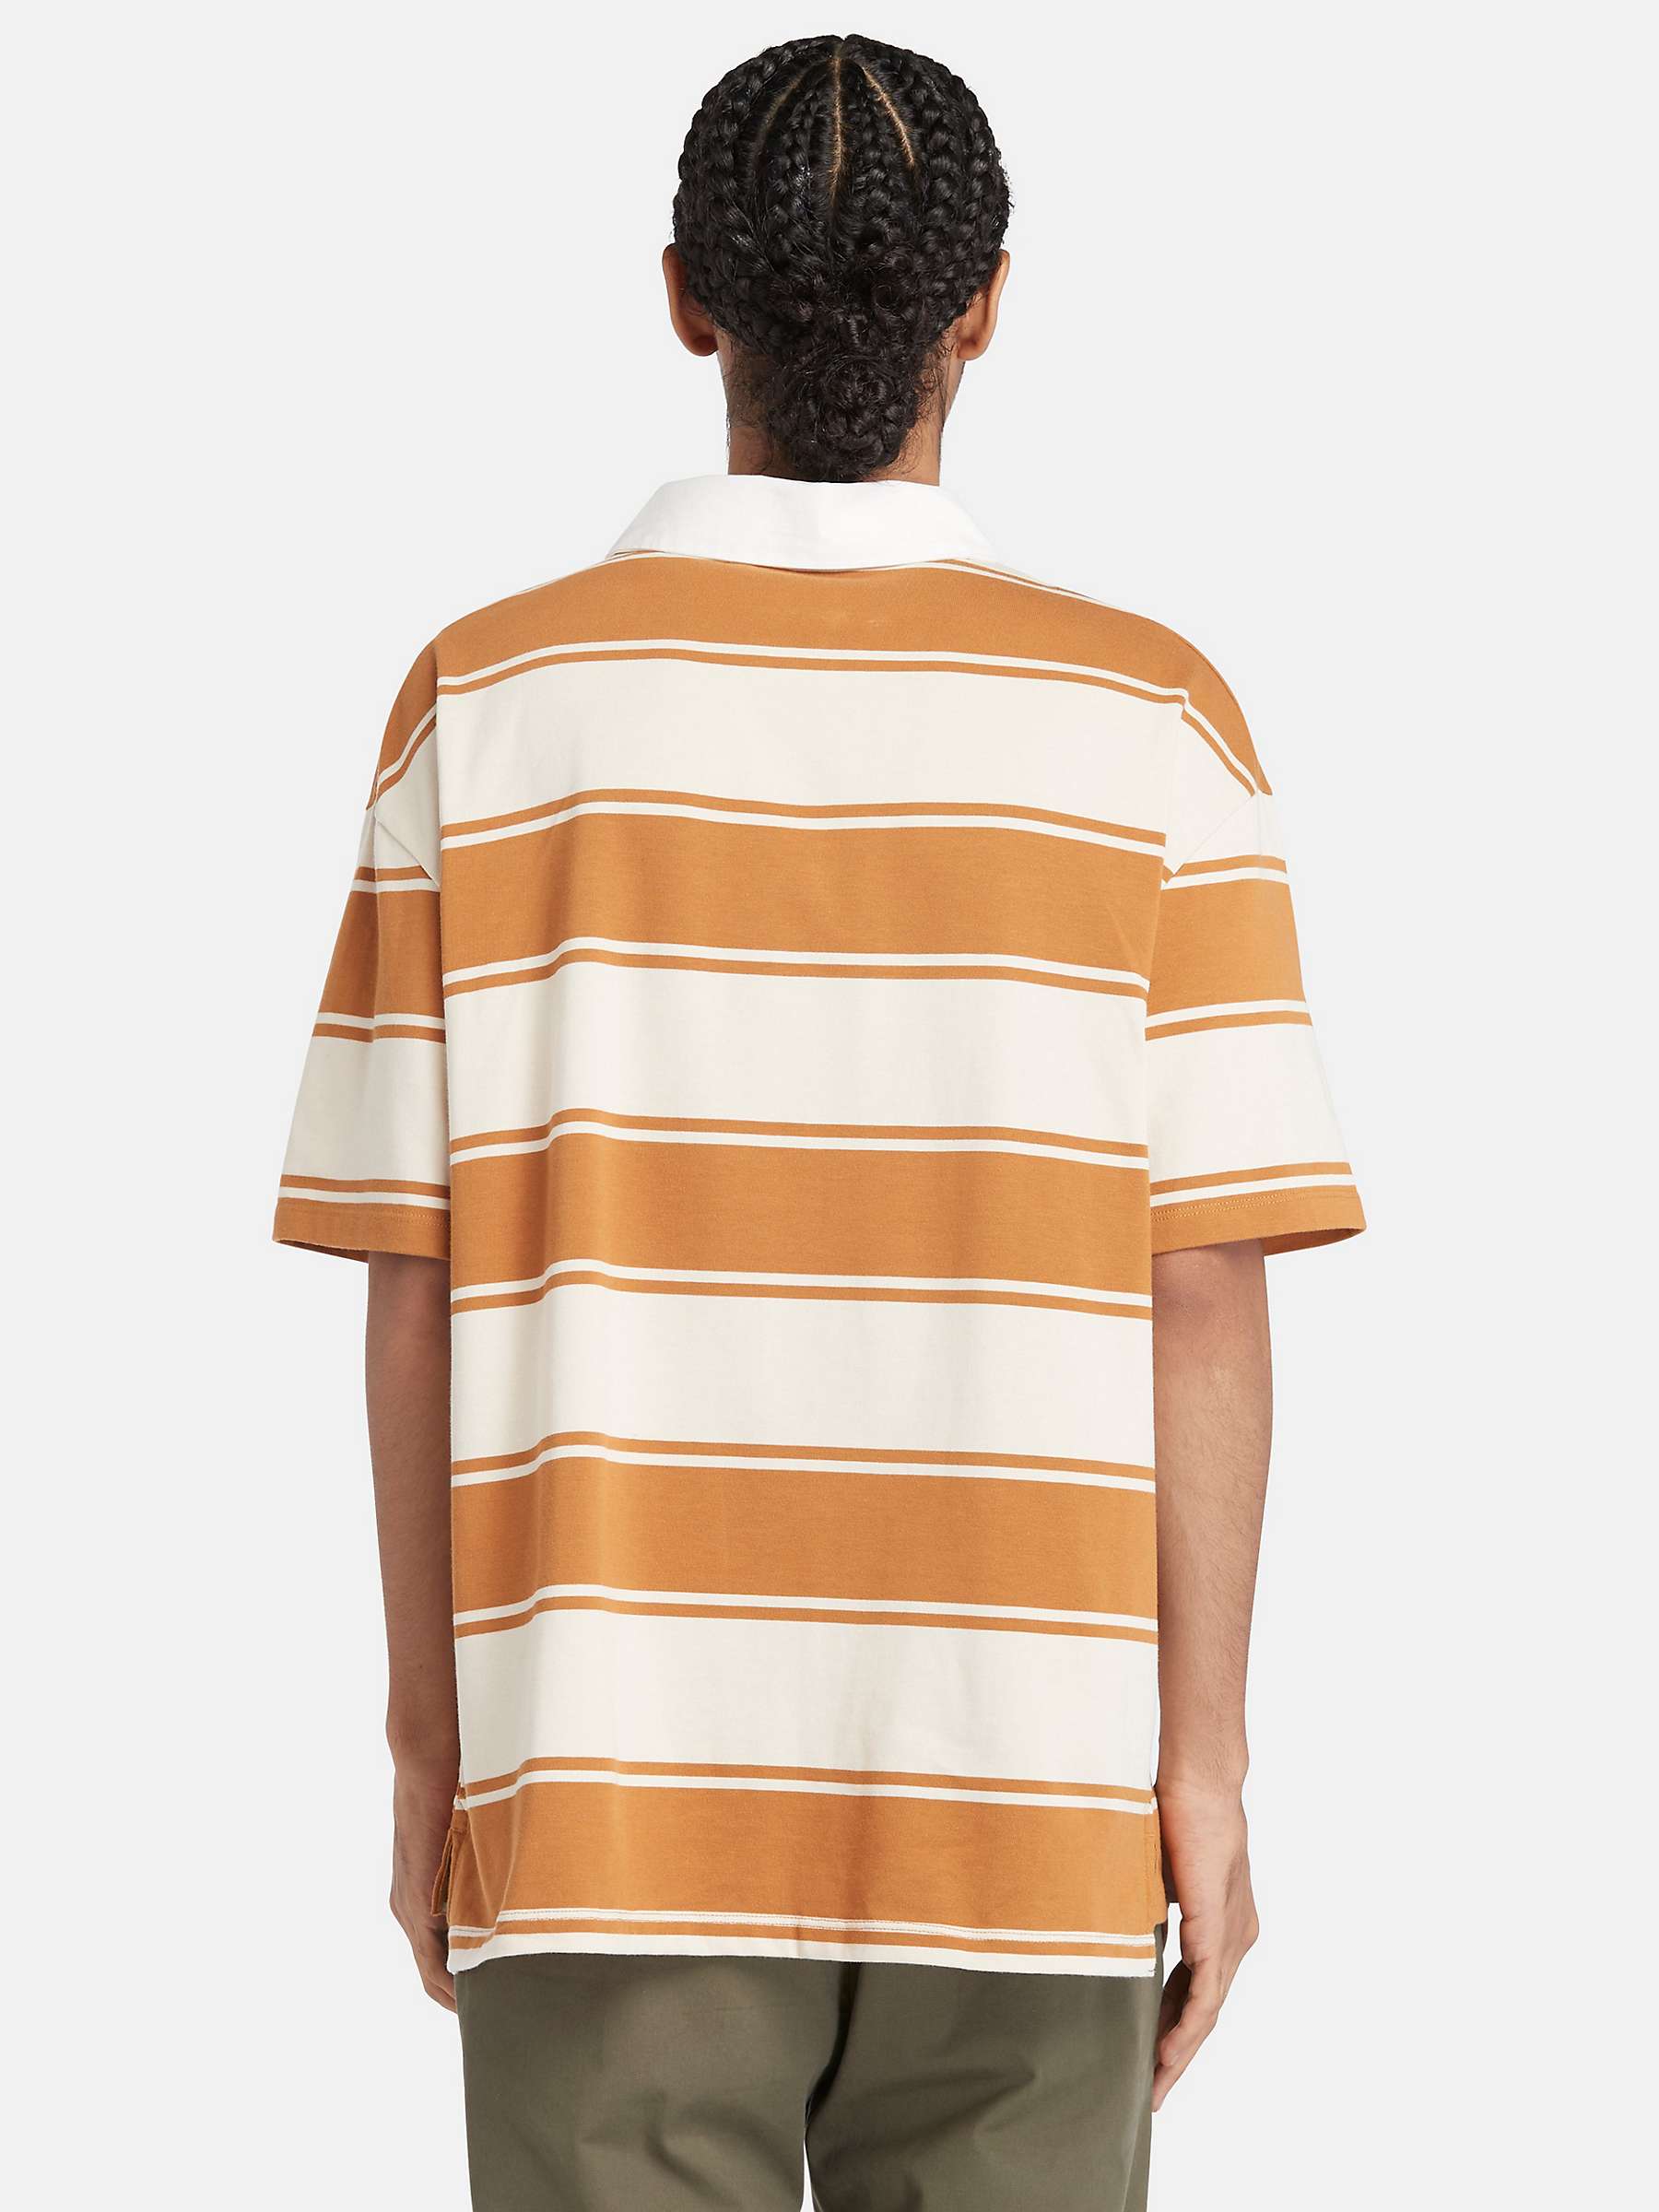 Buy Timberland Stripe Short Sleeve Rugby Shirt, Wheat/Multi Online at johnlewis.com